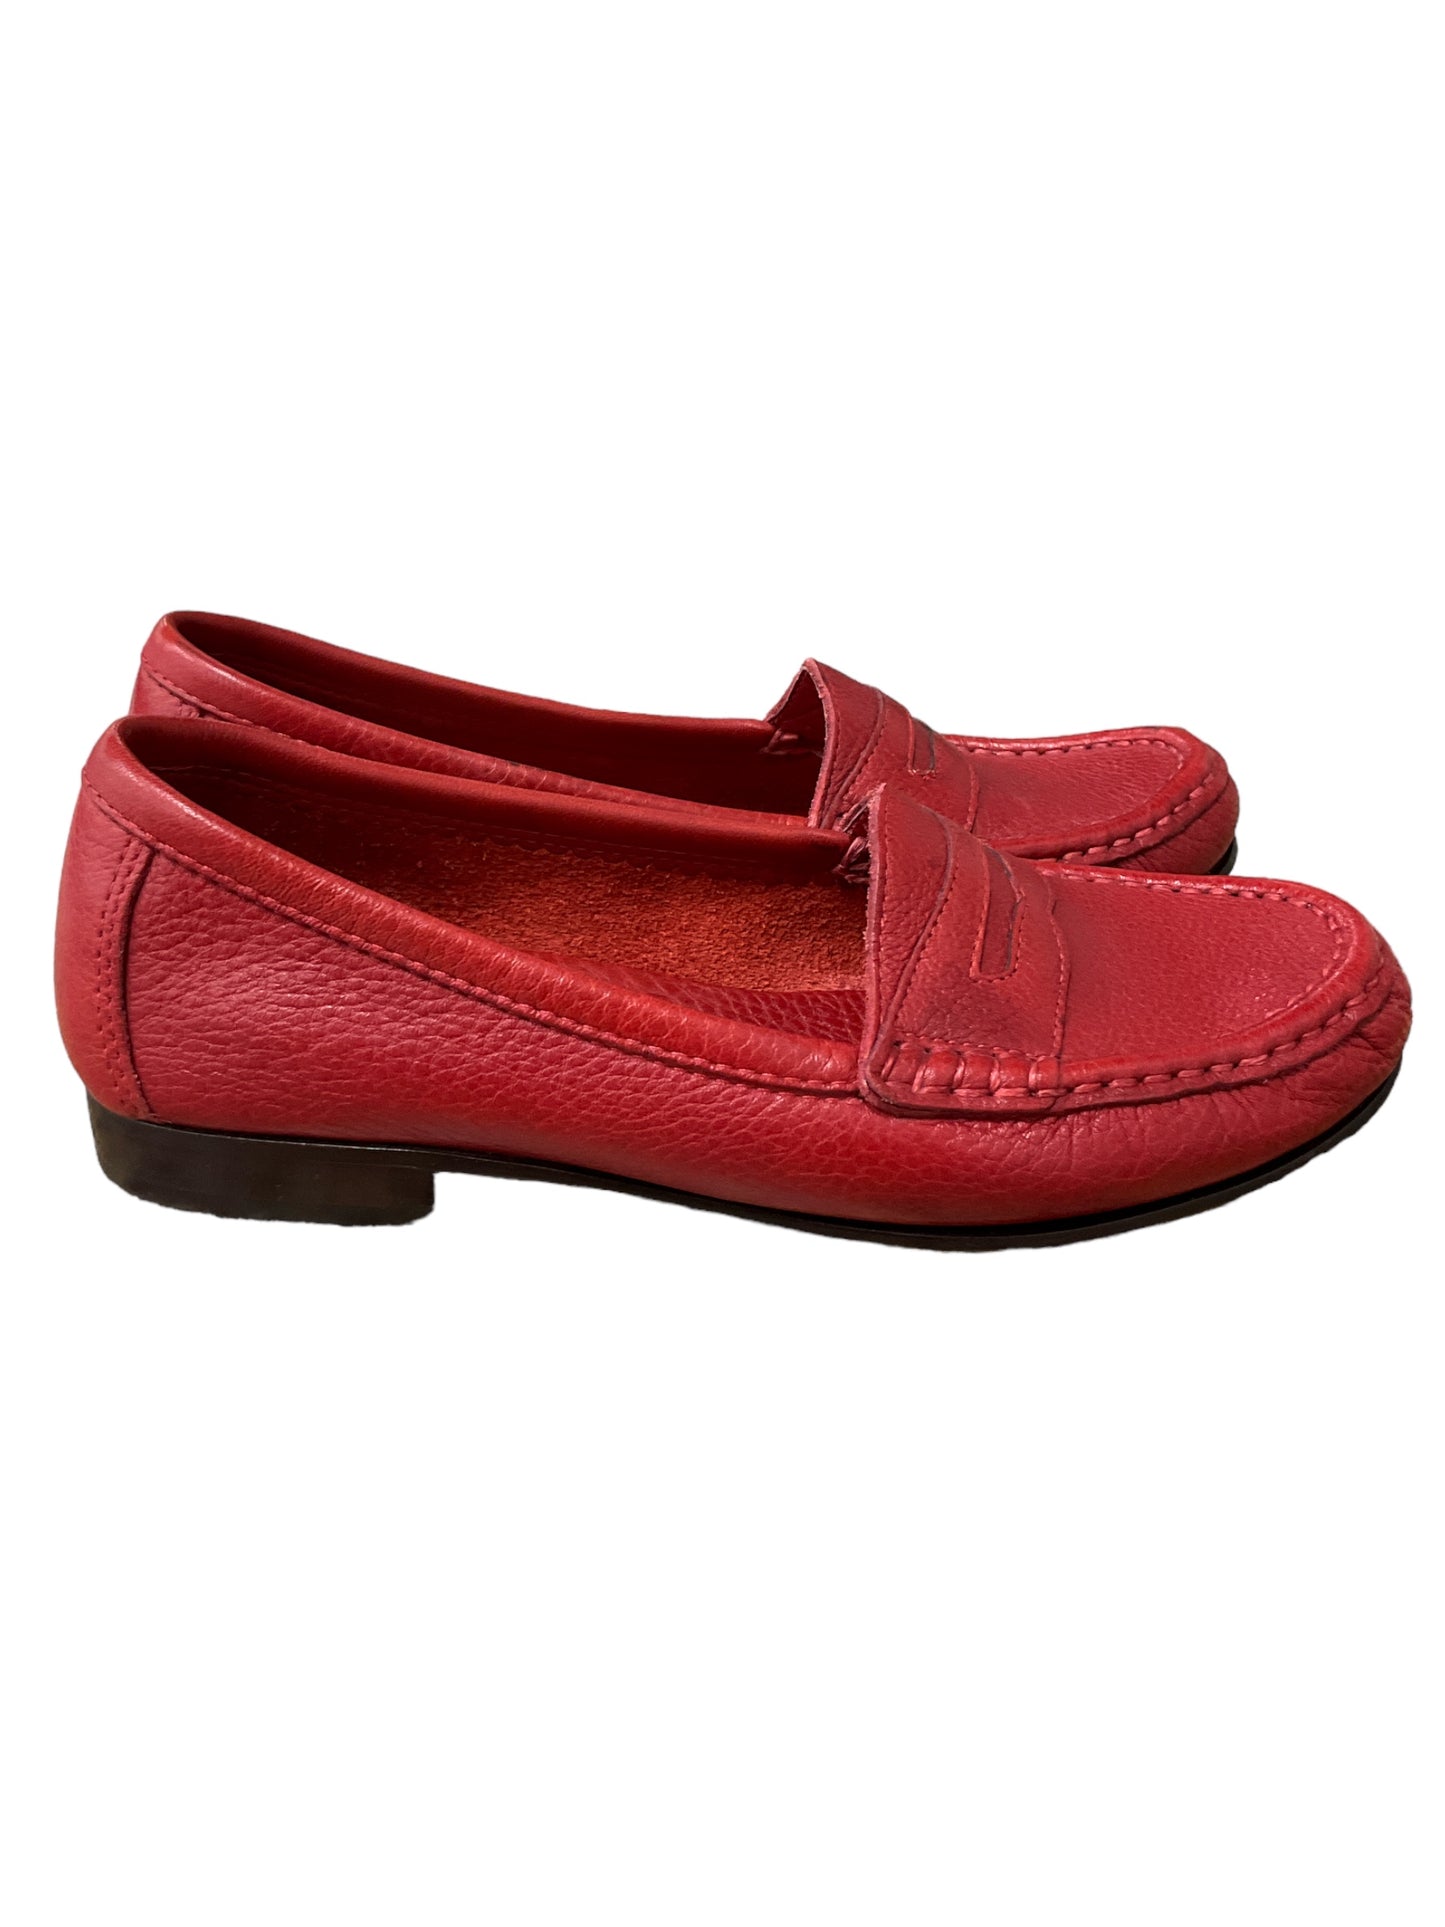 Shoes Flats Loafer Oxford By Antonio Melani  Size: 6.5